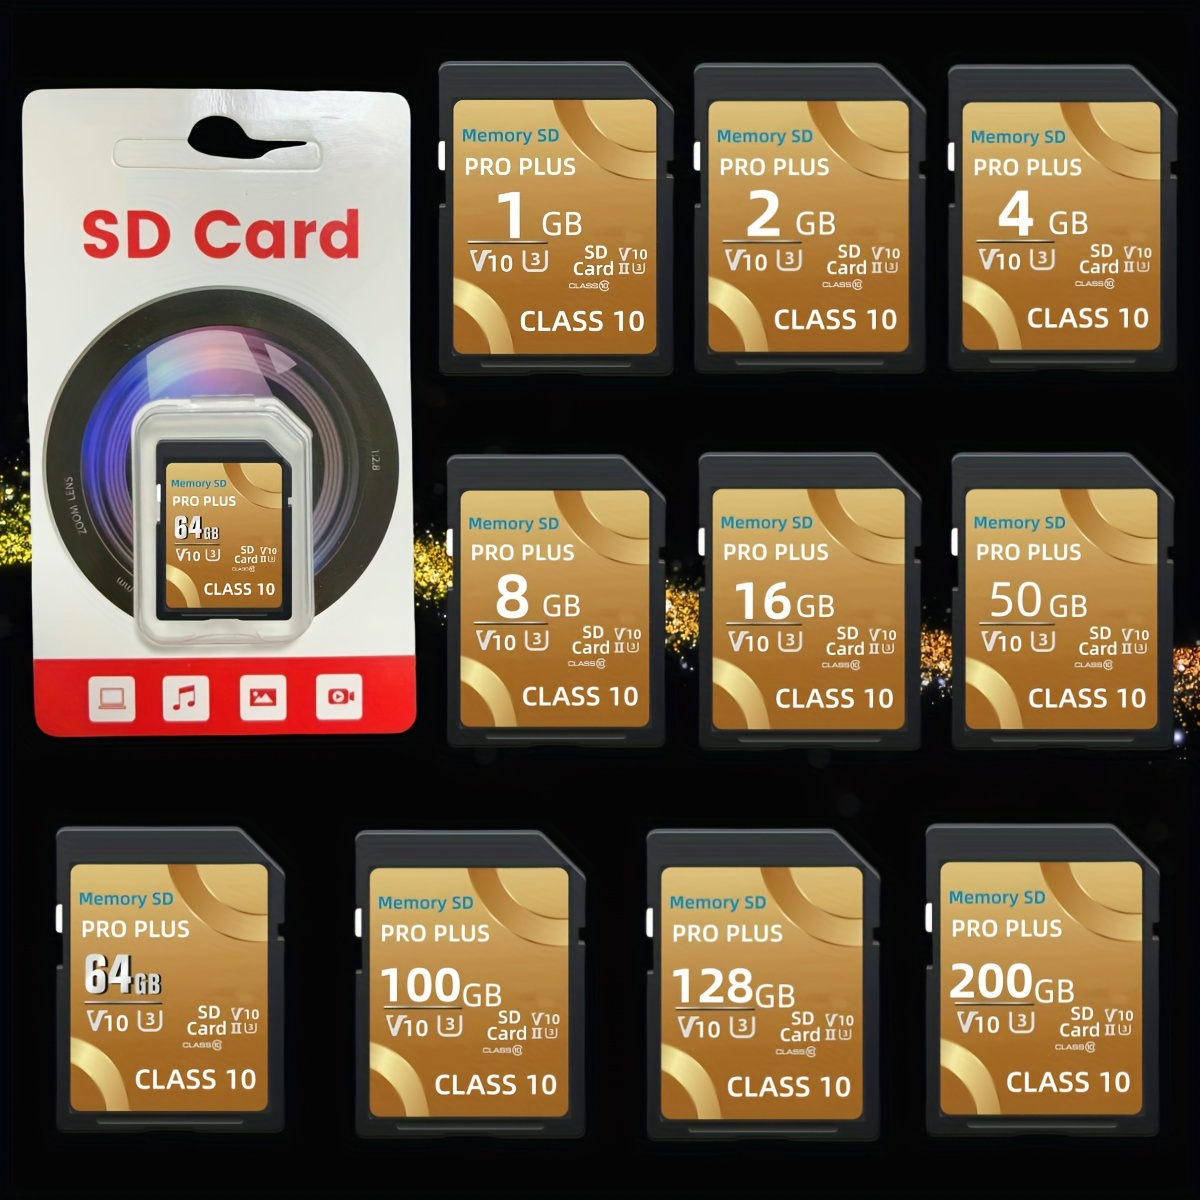 

64gb Sd Plus Memory Card High Speed Memory Card Classe 10 3d 4k V30 Video High Speed Capacity Uhs-i Sd Card For Camera